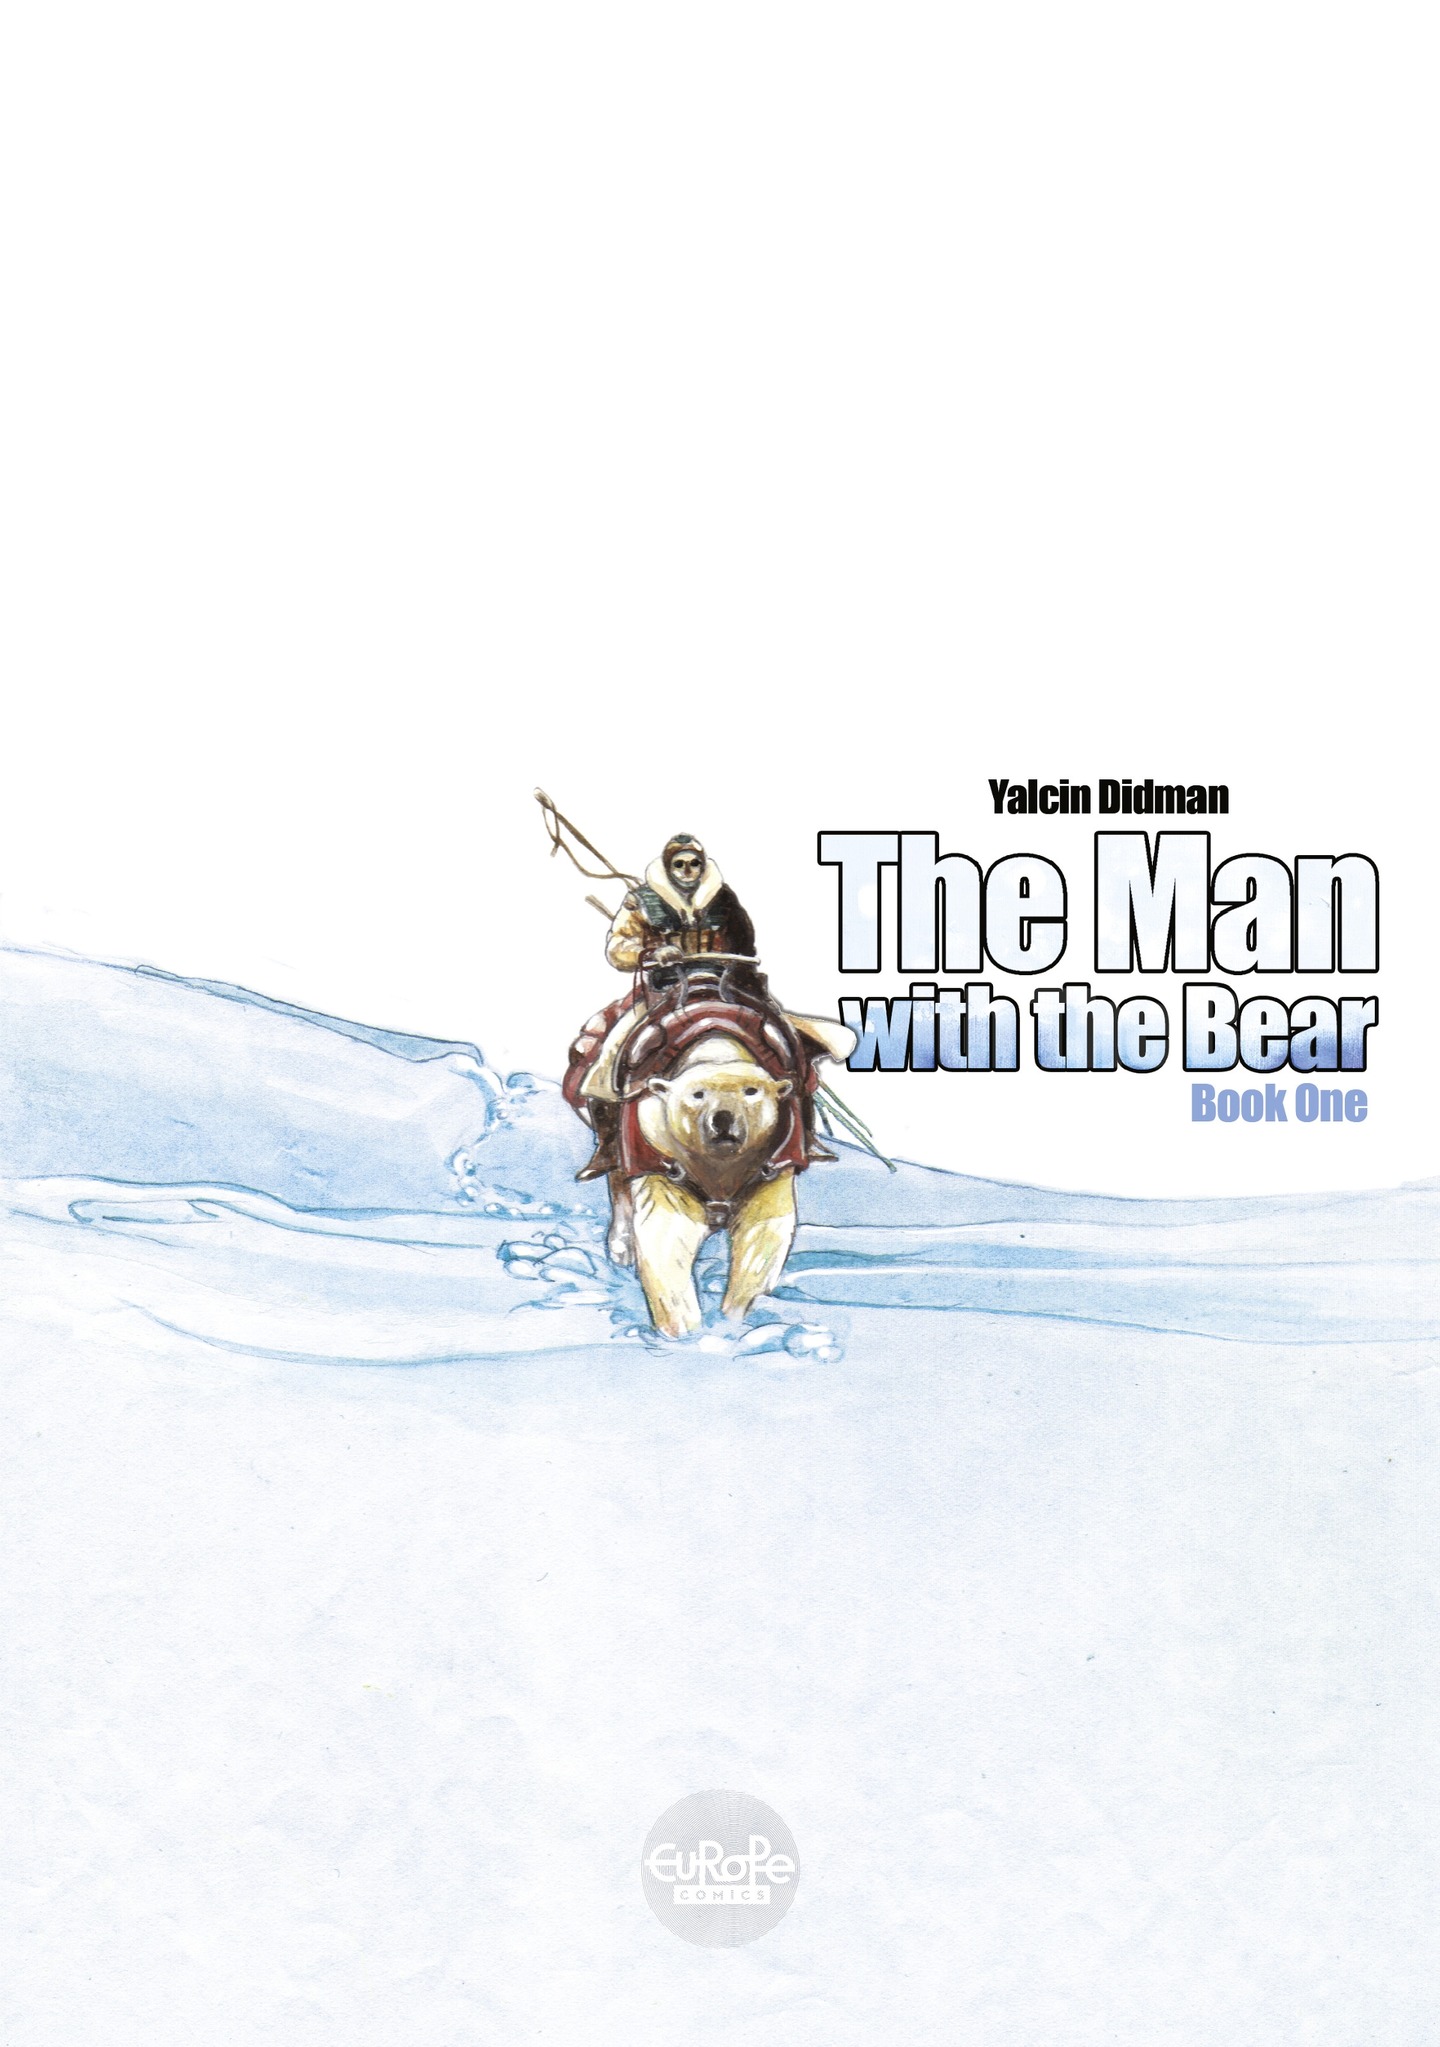 Read online The Man With the Bear comic -  Issue #1 - 2